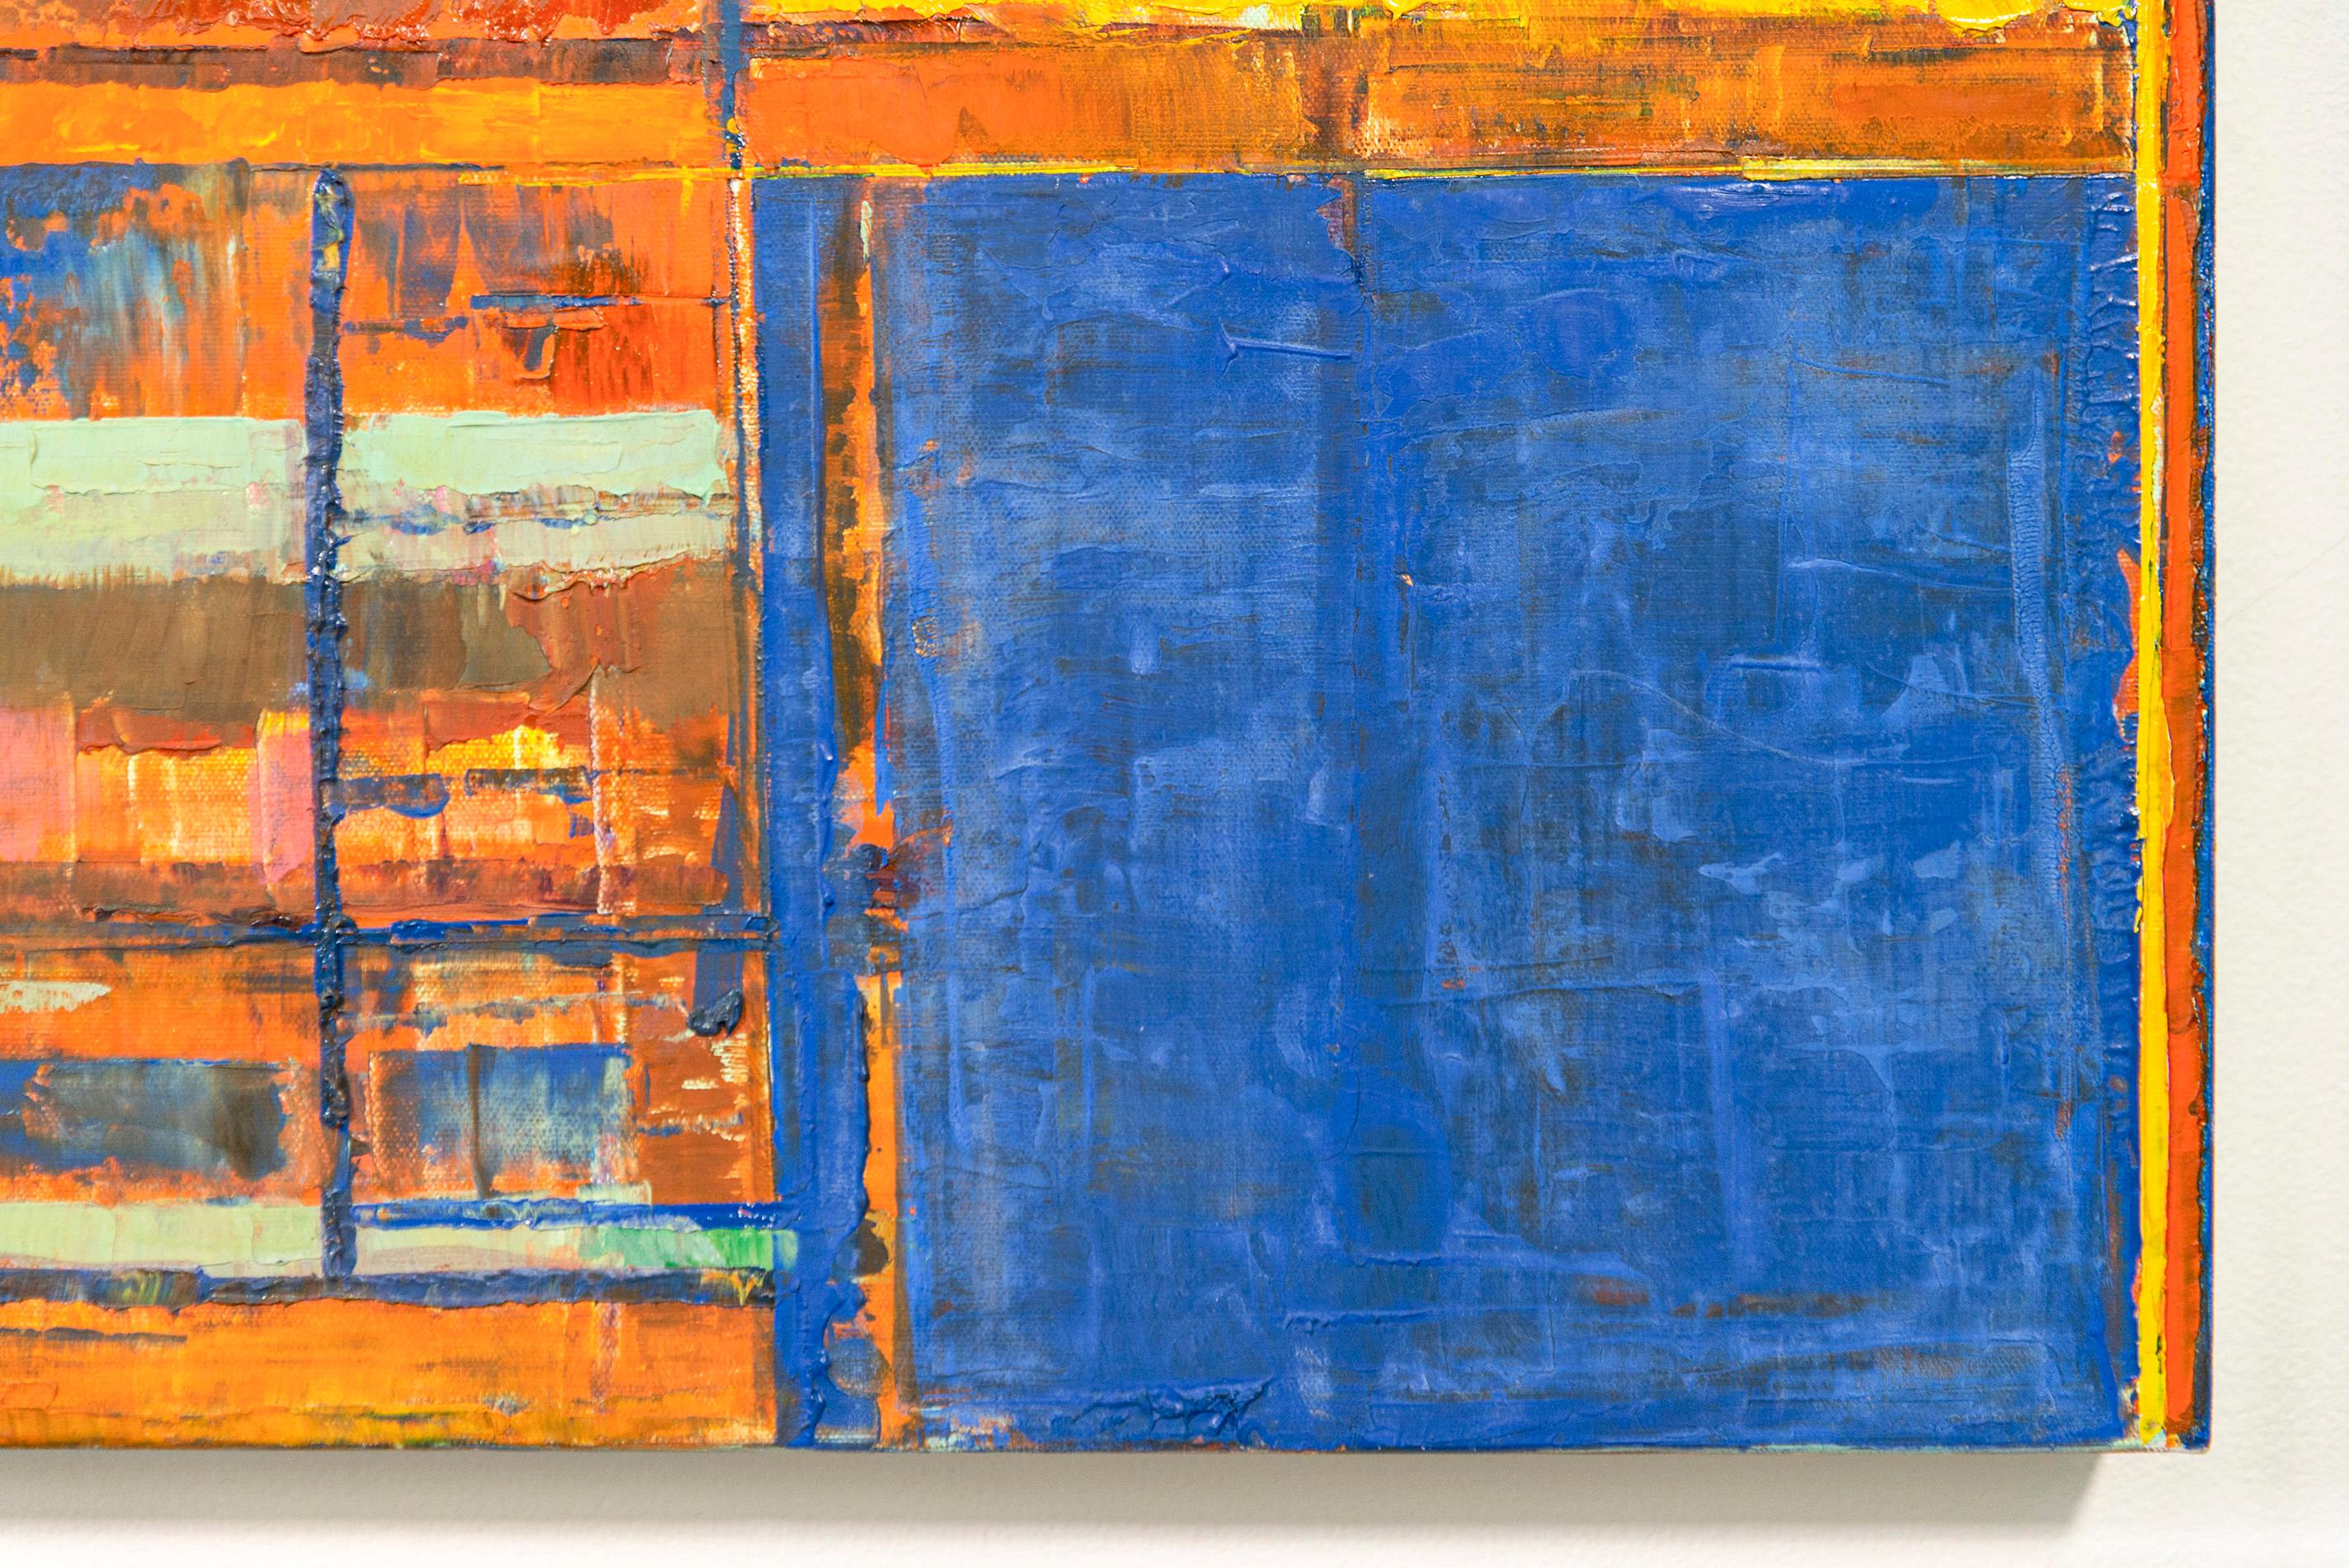 A masterful colourist, this engaging abstract is by David Sorensen. The Canadian artist was known for his bright colour palette and dynamic form. This piece—rows of colour—orange, yellow, blue, golden brown, pale green and black overlap and play